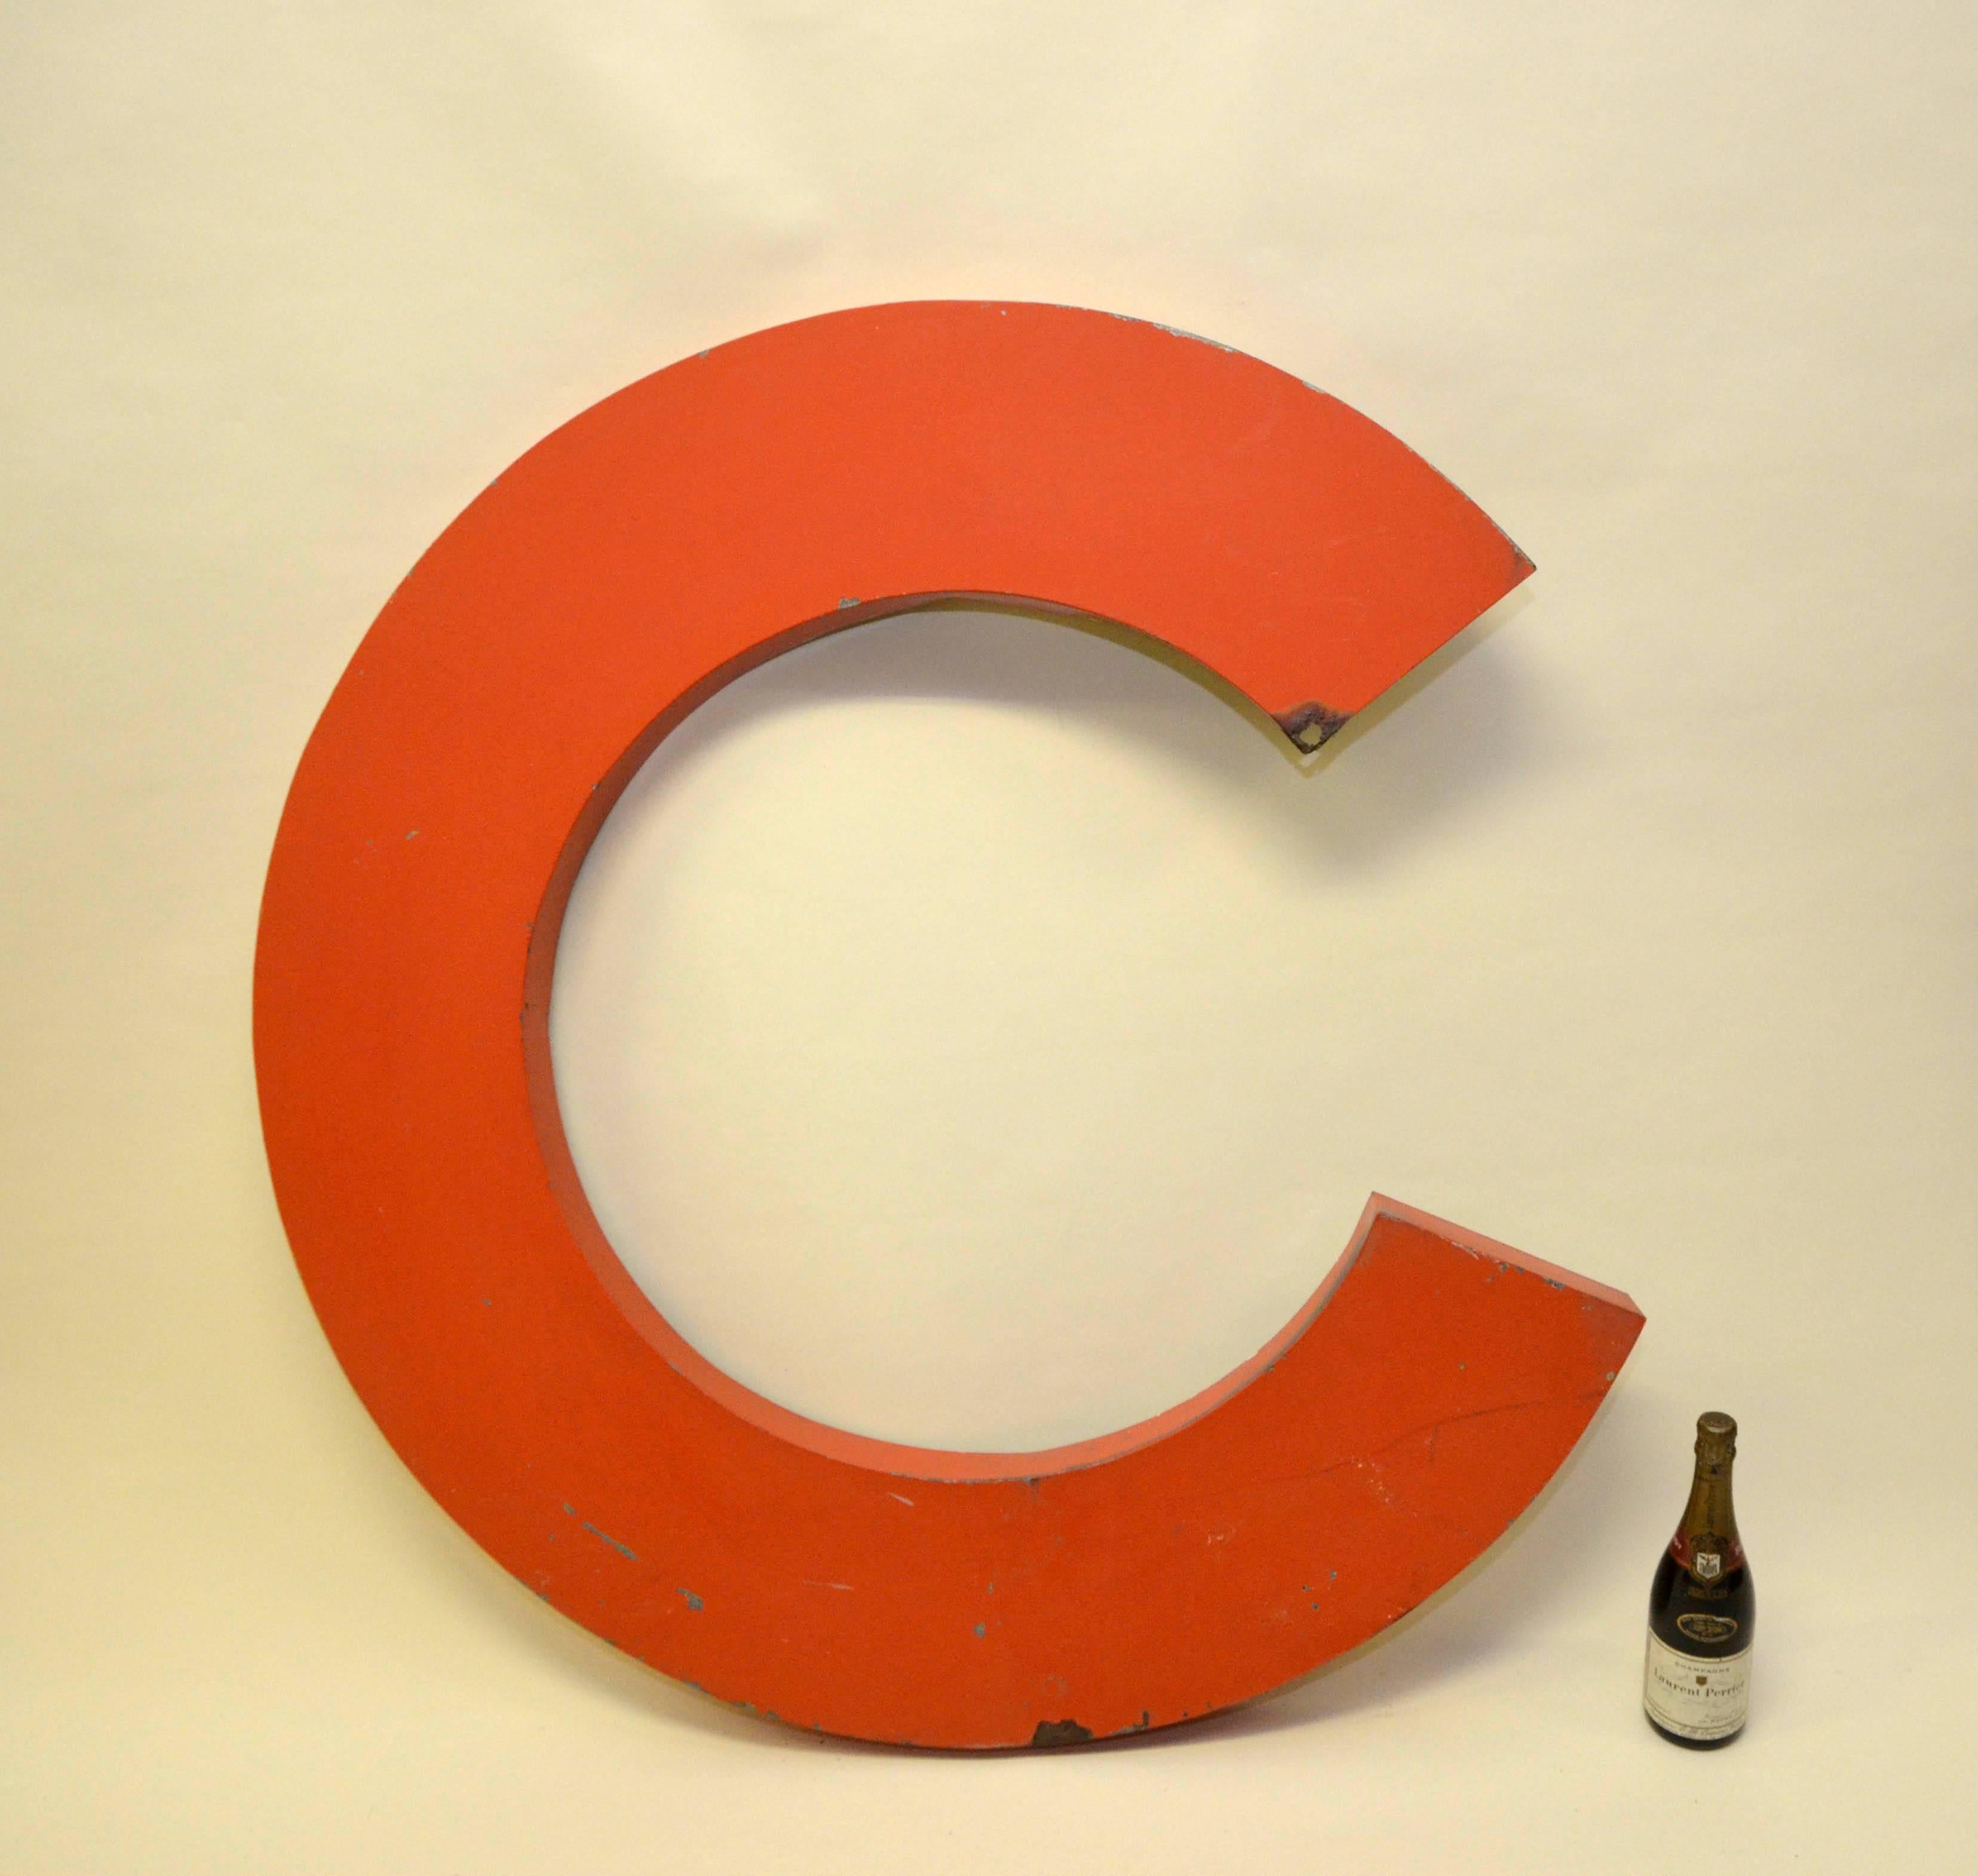 Very large orange capital letter C from French Citroën sign.
From the same sign also available in stock letters: I,T,O,N.

Collector's note:

Citroën is a major French automobile manufacturer. In the 1950s car dealers in France had large signs on